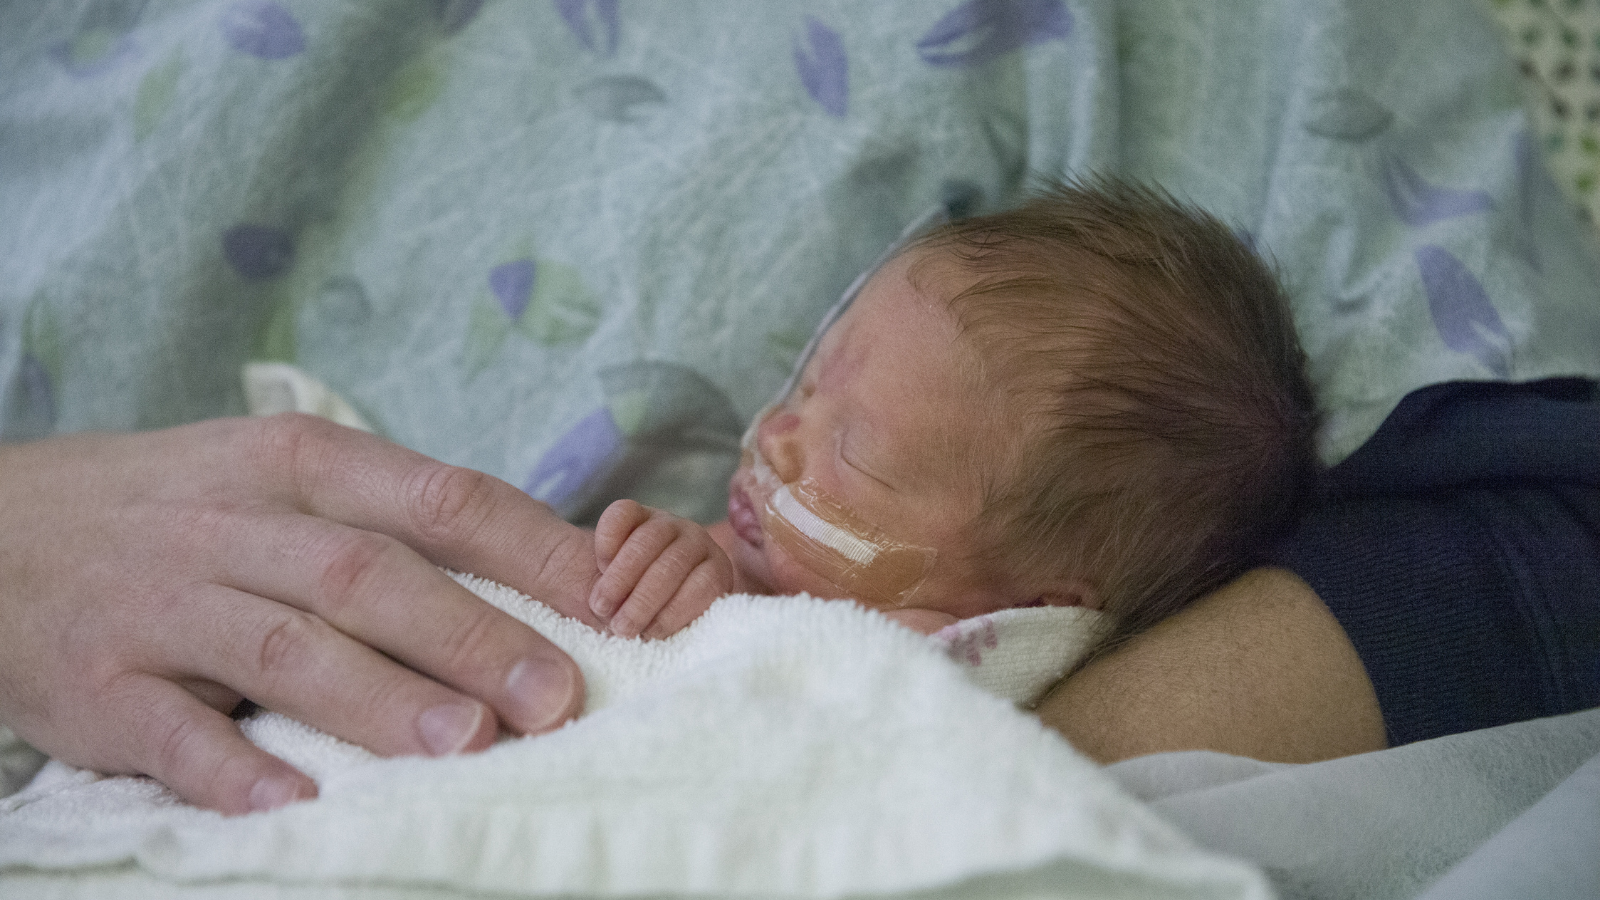 All about RSV, NICU baby, hand to hold